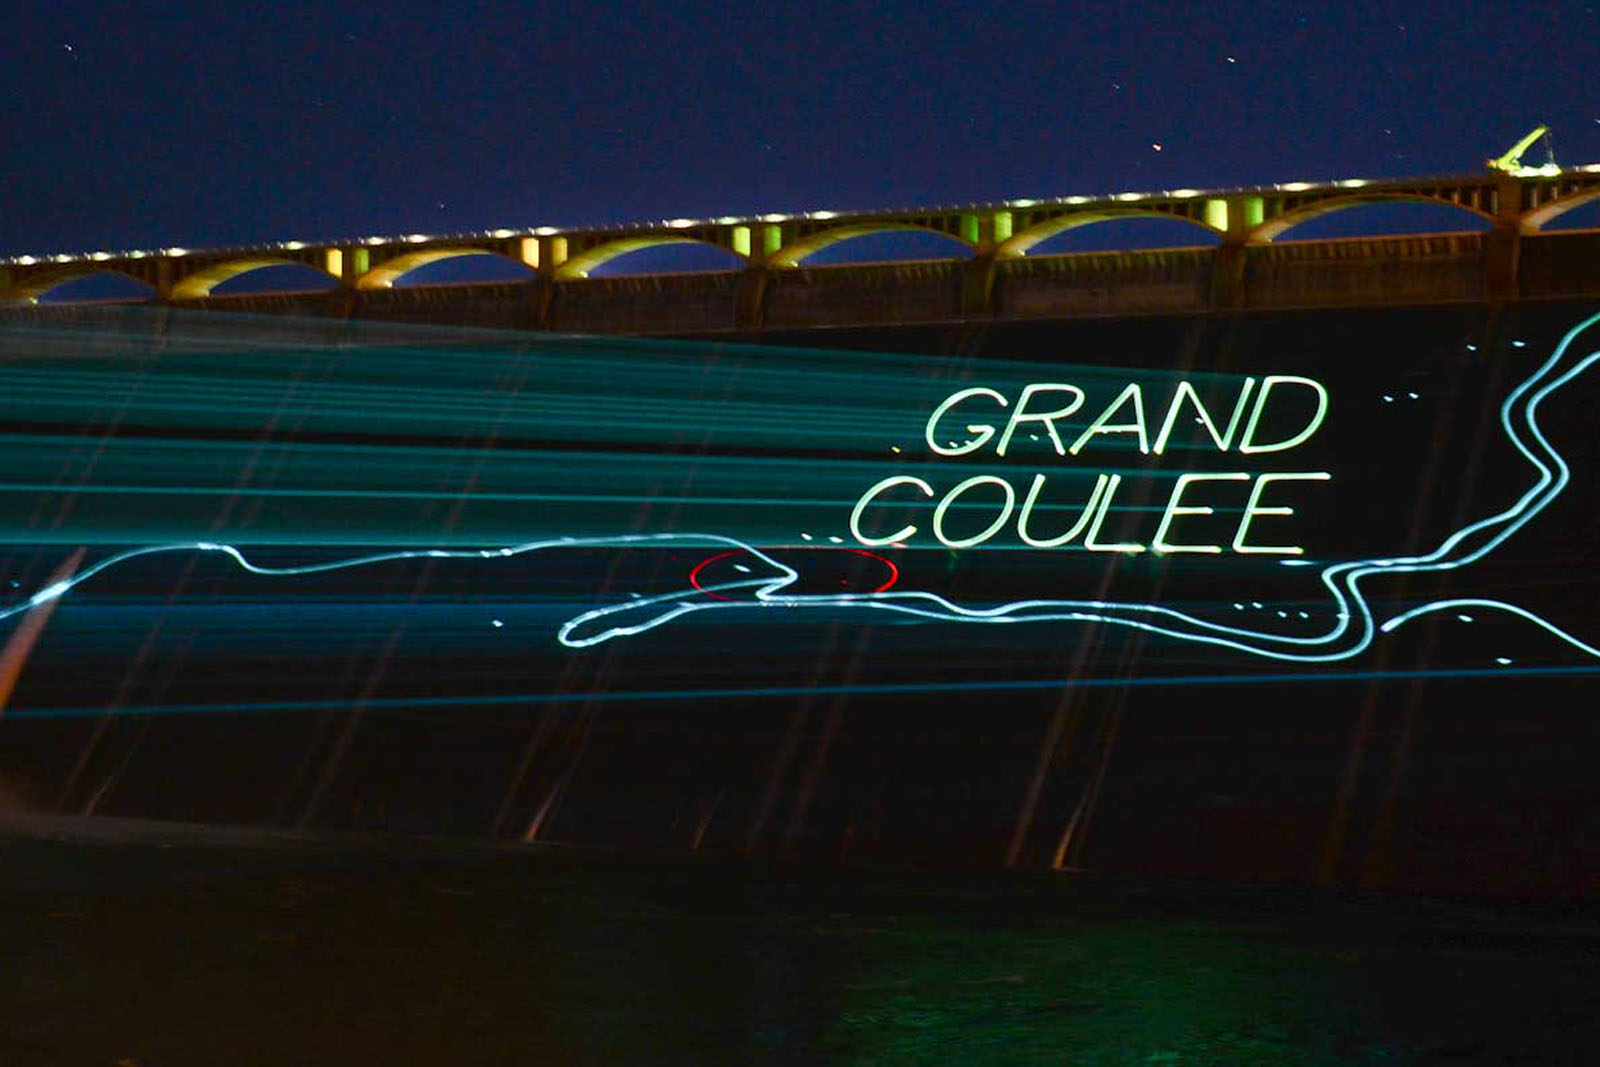 Spectacular Laser Light Show on the Spillway of Grand Coulee Dam